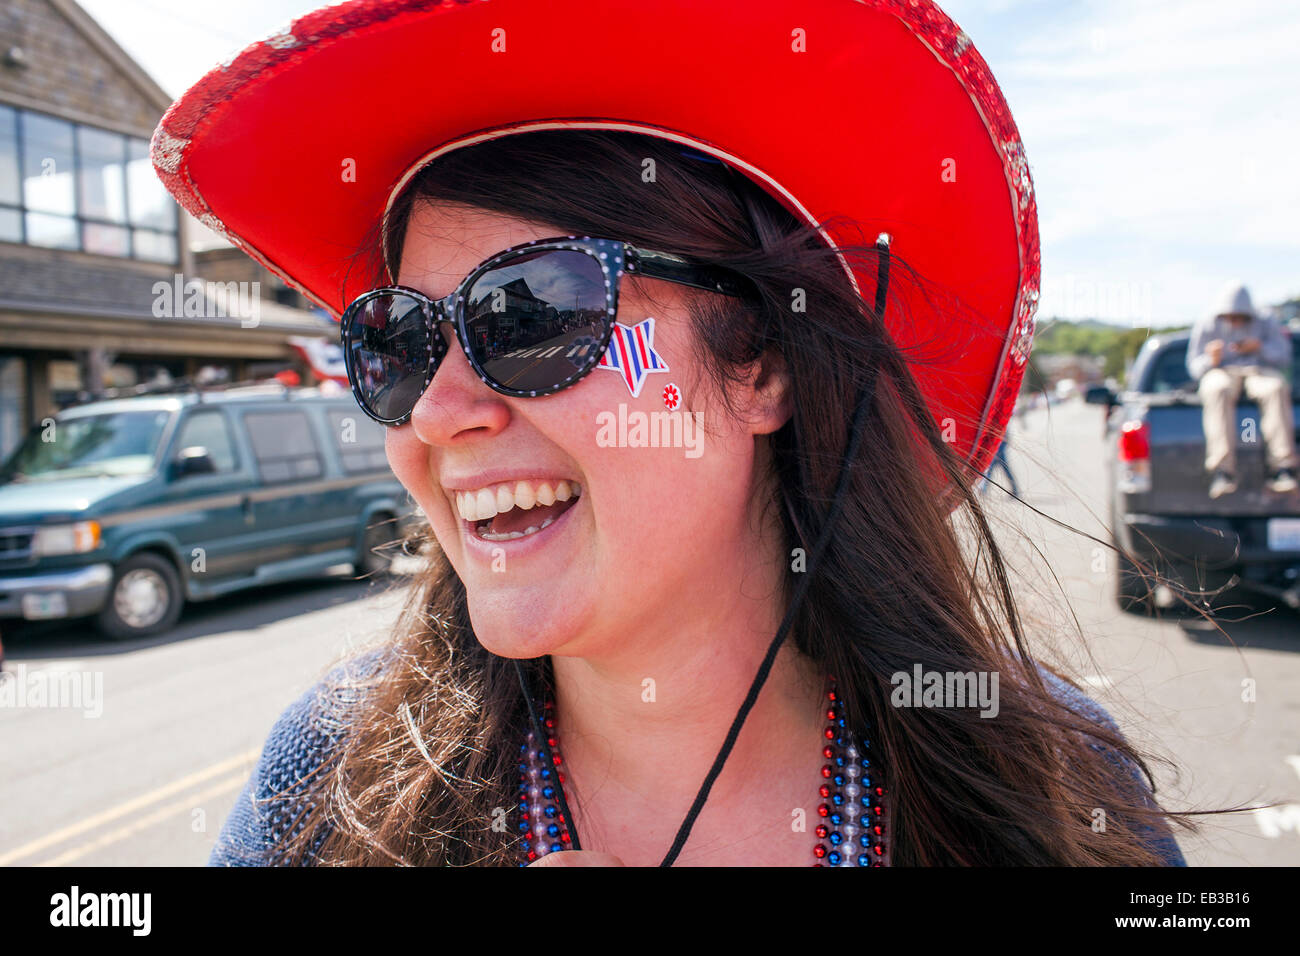 Caucasian woman wearing cowboy hat and face paint in street Stock Photo